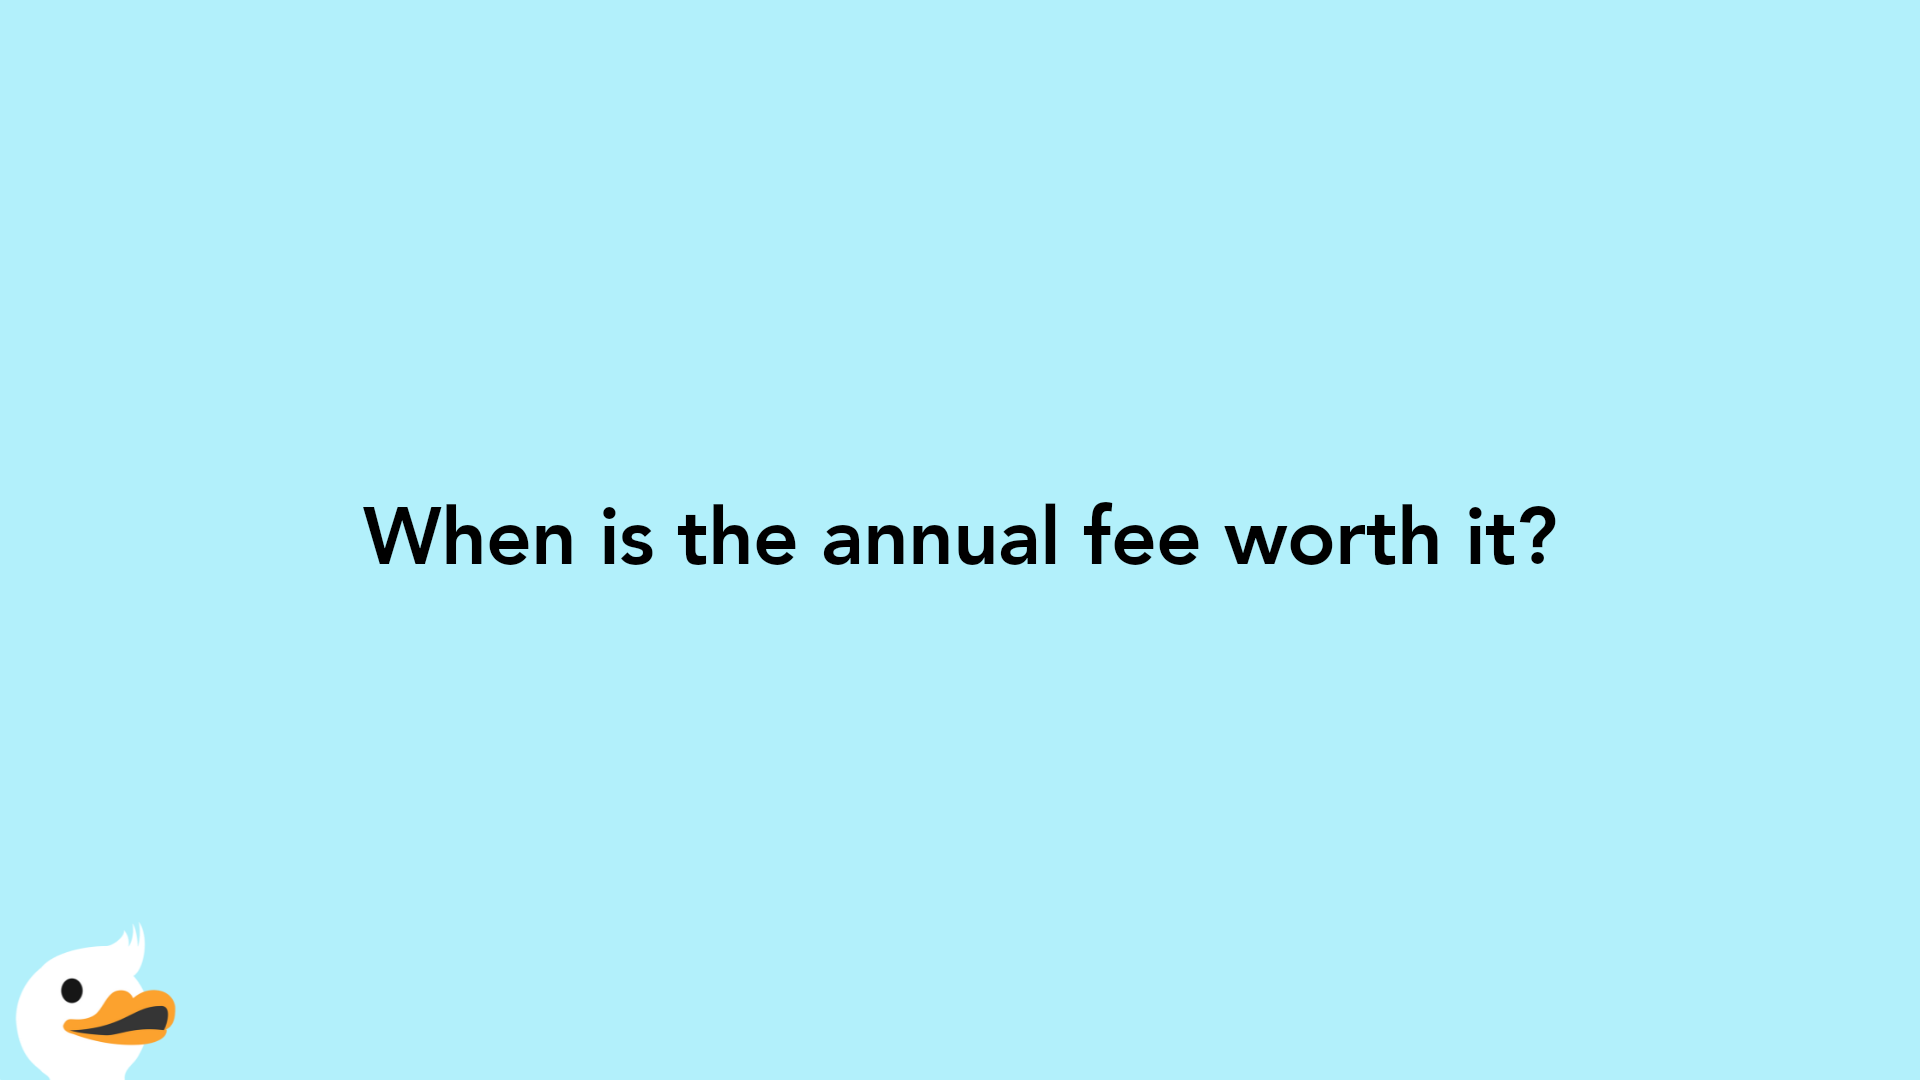 When is the annual fee worth it?